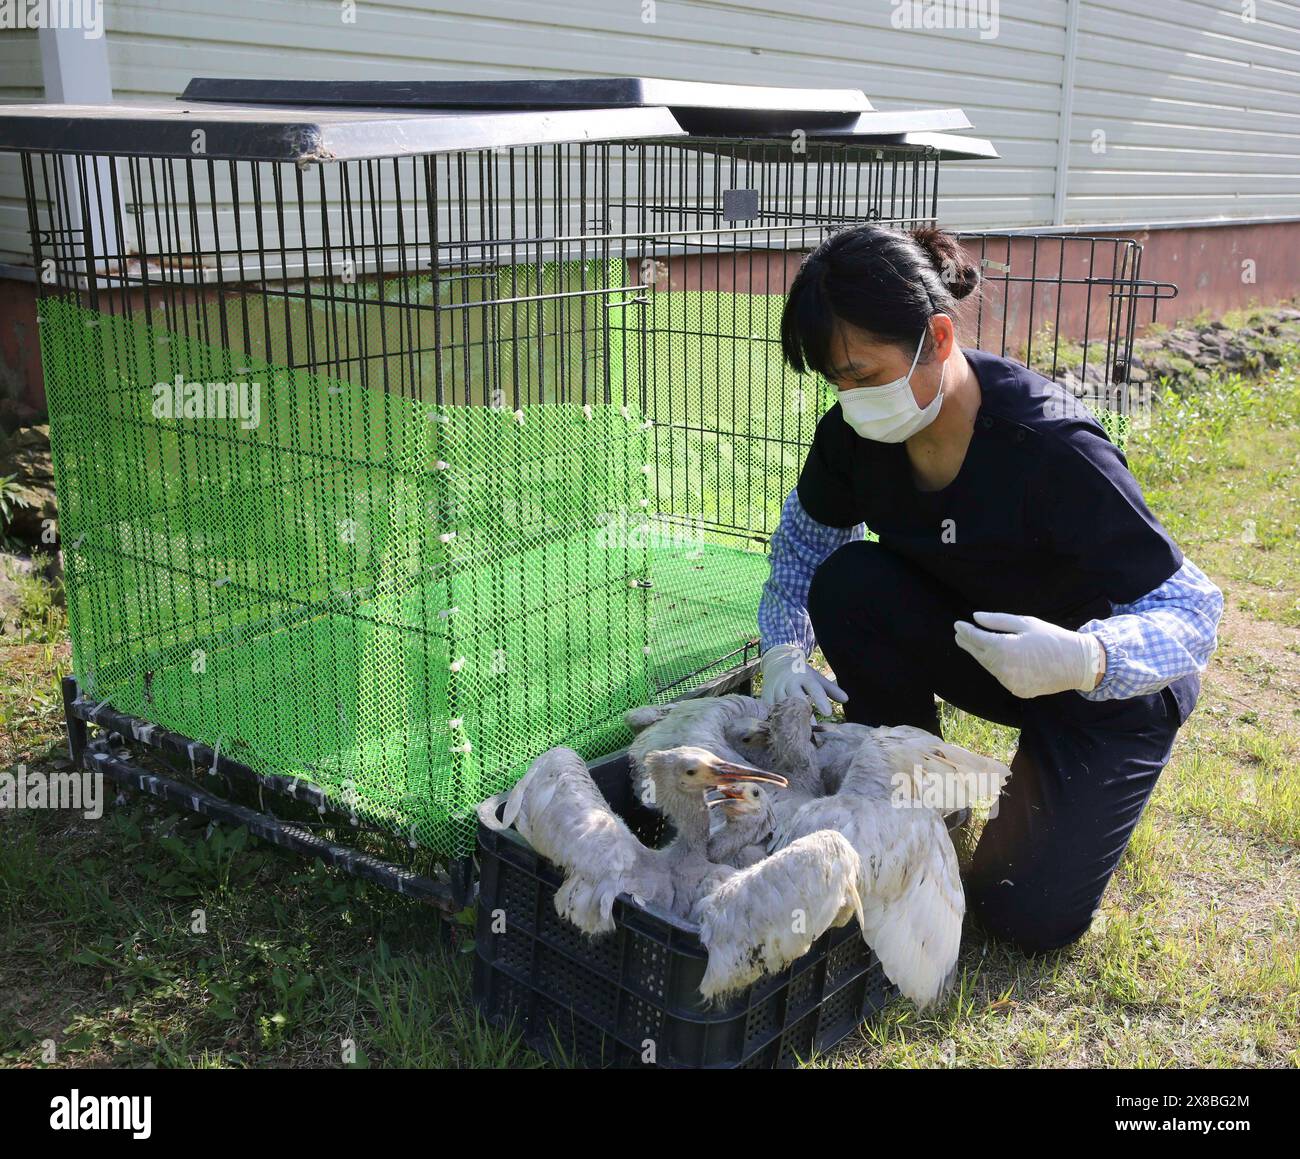 (240524) -- SEOUL, May 24, 2024 (Xinhua) -- A staff member takes care of crested ibis chicks at the Upo Crested Ibis Restoration Center in Changnyeong, South Korea, May 20, 2024. The crested ibis, which used to be widely distributed in China, Japan, South Korea and other East Asian regions, has become an endangered bird species worldwide, rarely seen in South Korea since the 1980s. In 2008, the crested ibis couple 'Yang Zhou' and 'Long Ting' arrived and settled down at the Upo Crested Ibis Restoration Center in Changnyeong as a gift from China to South Korea. Another two male crested ibises Stock Photo